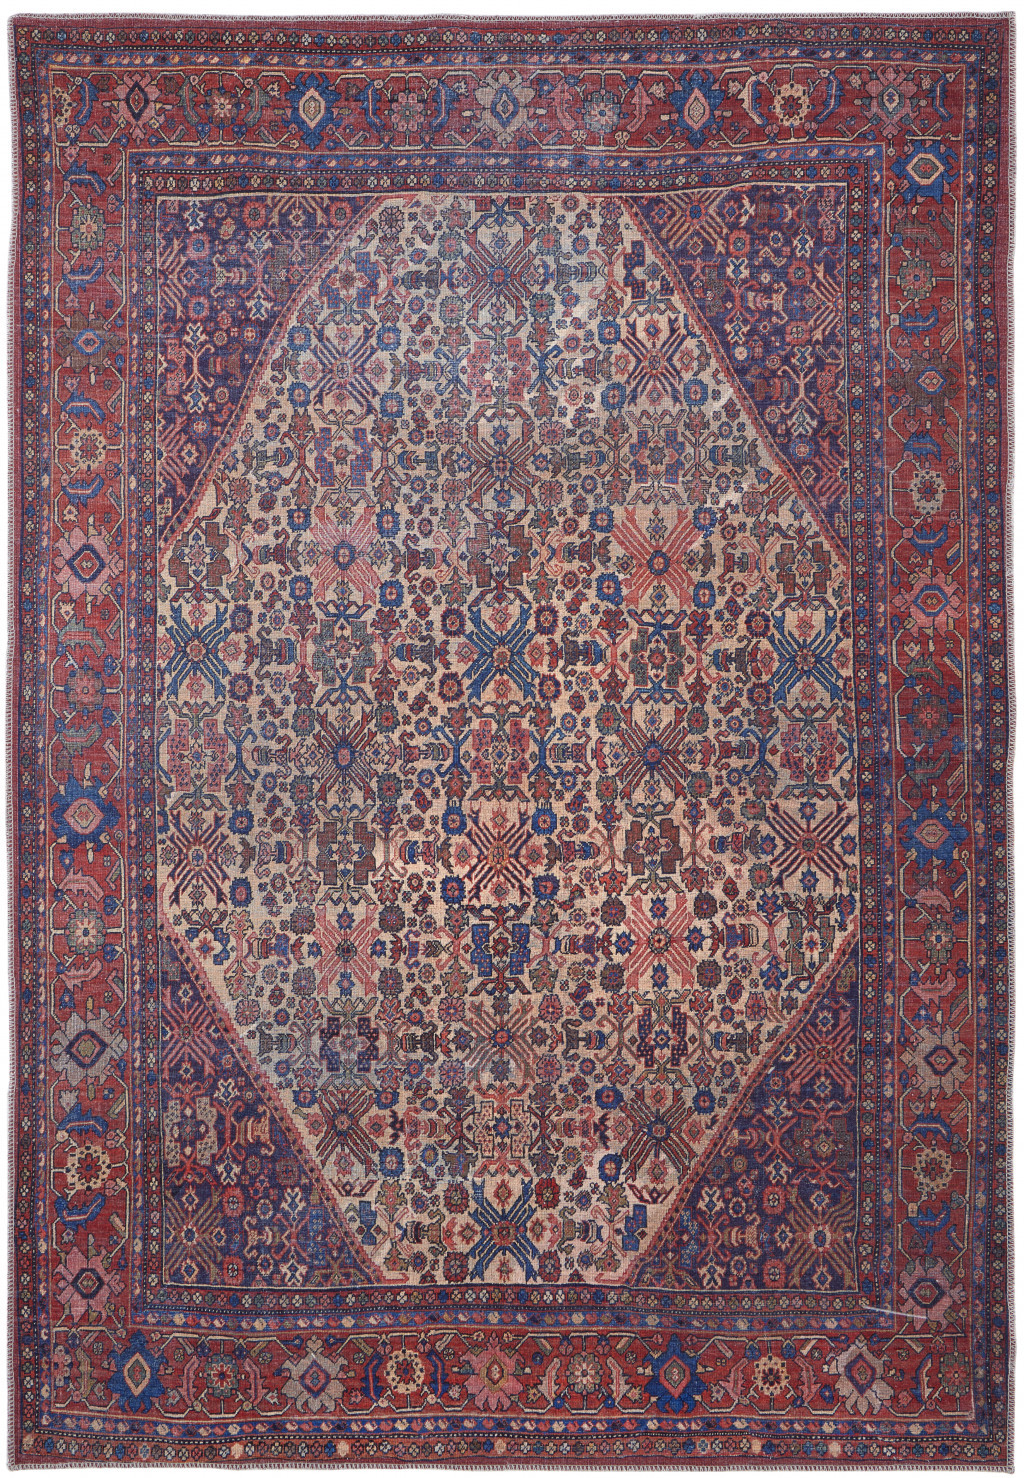 2' X 3' Red Tan And Blue Floral Power Loom Area Rug-515132-1